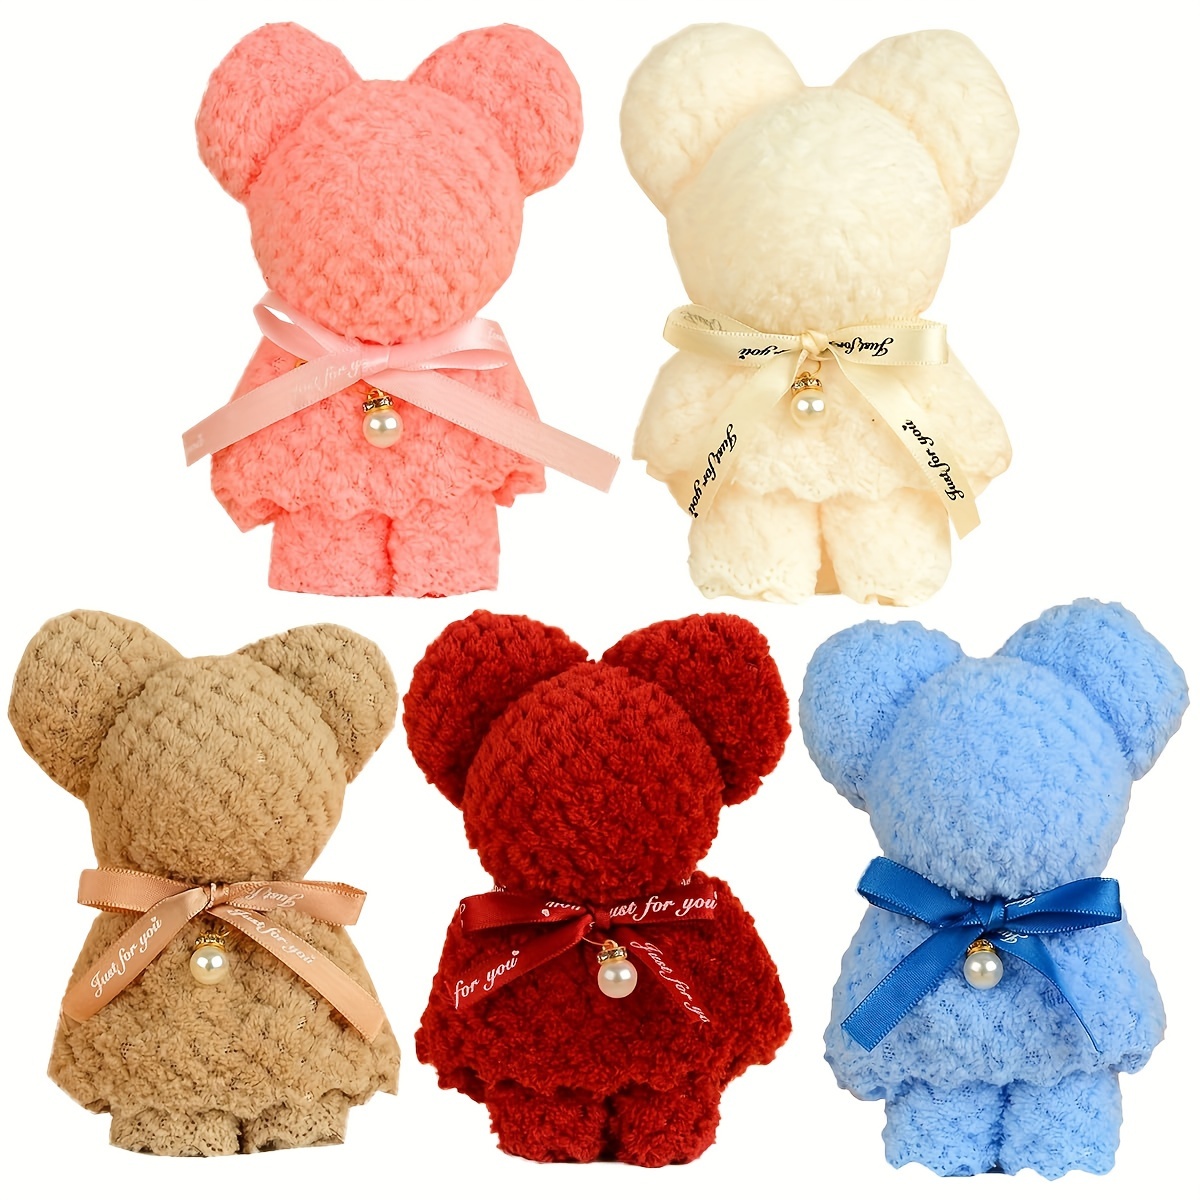 

5pcs Bear Shaped Towels Soft Coral Fleece Hand Towels Kitchen Towels Gift Set For Wedding Birthday Festivity Souvenir Gifts Mother's Day Party Gift